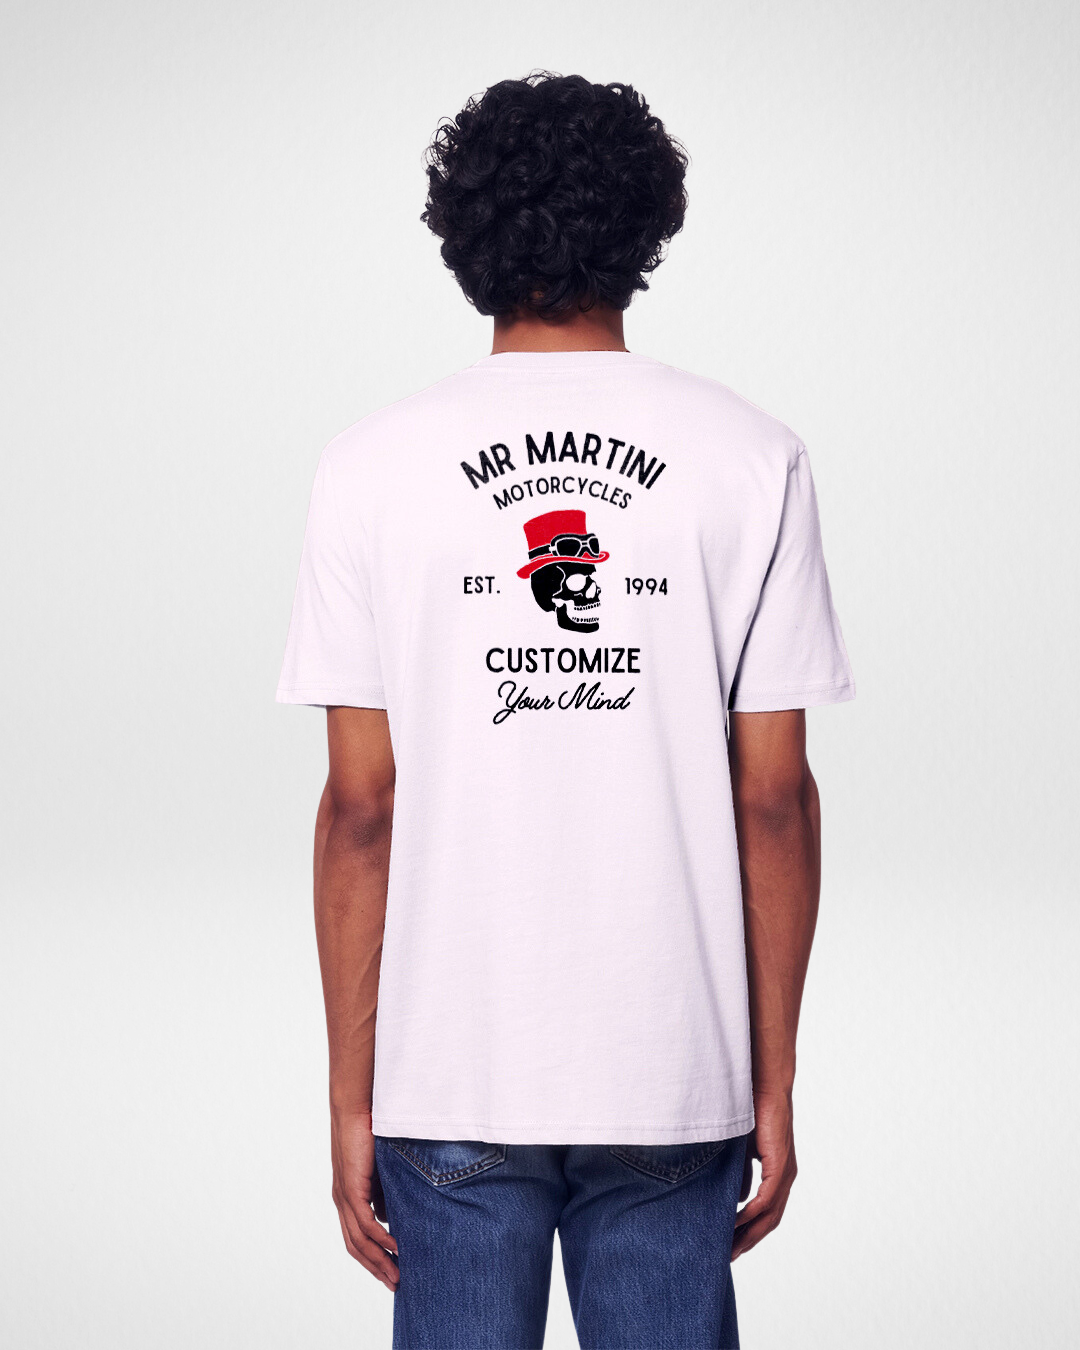 Customize Your Mind Tee - White